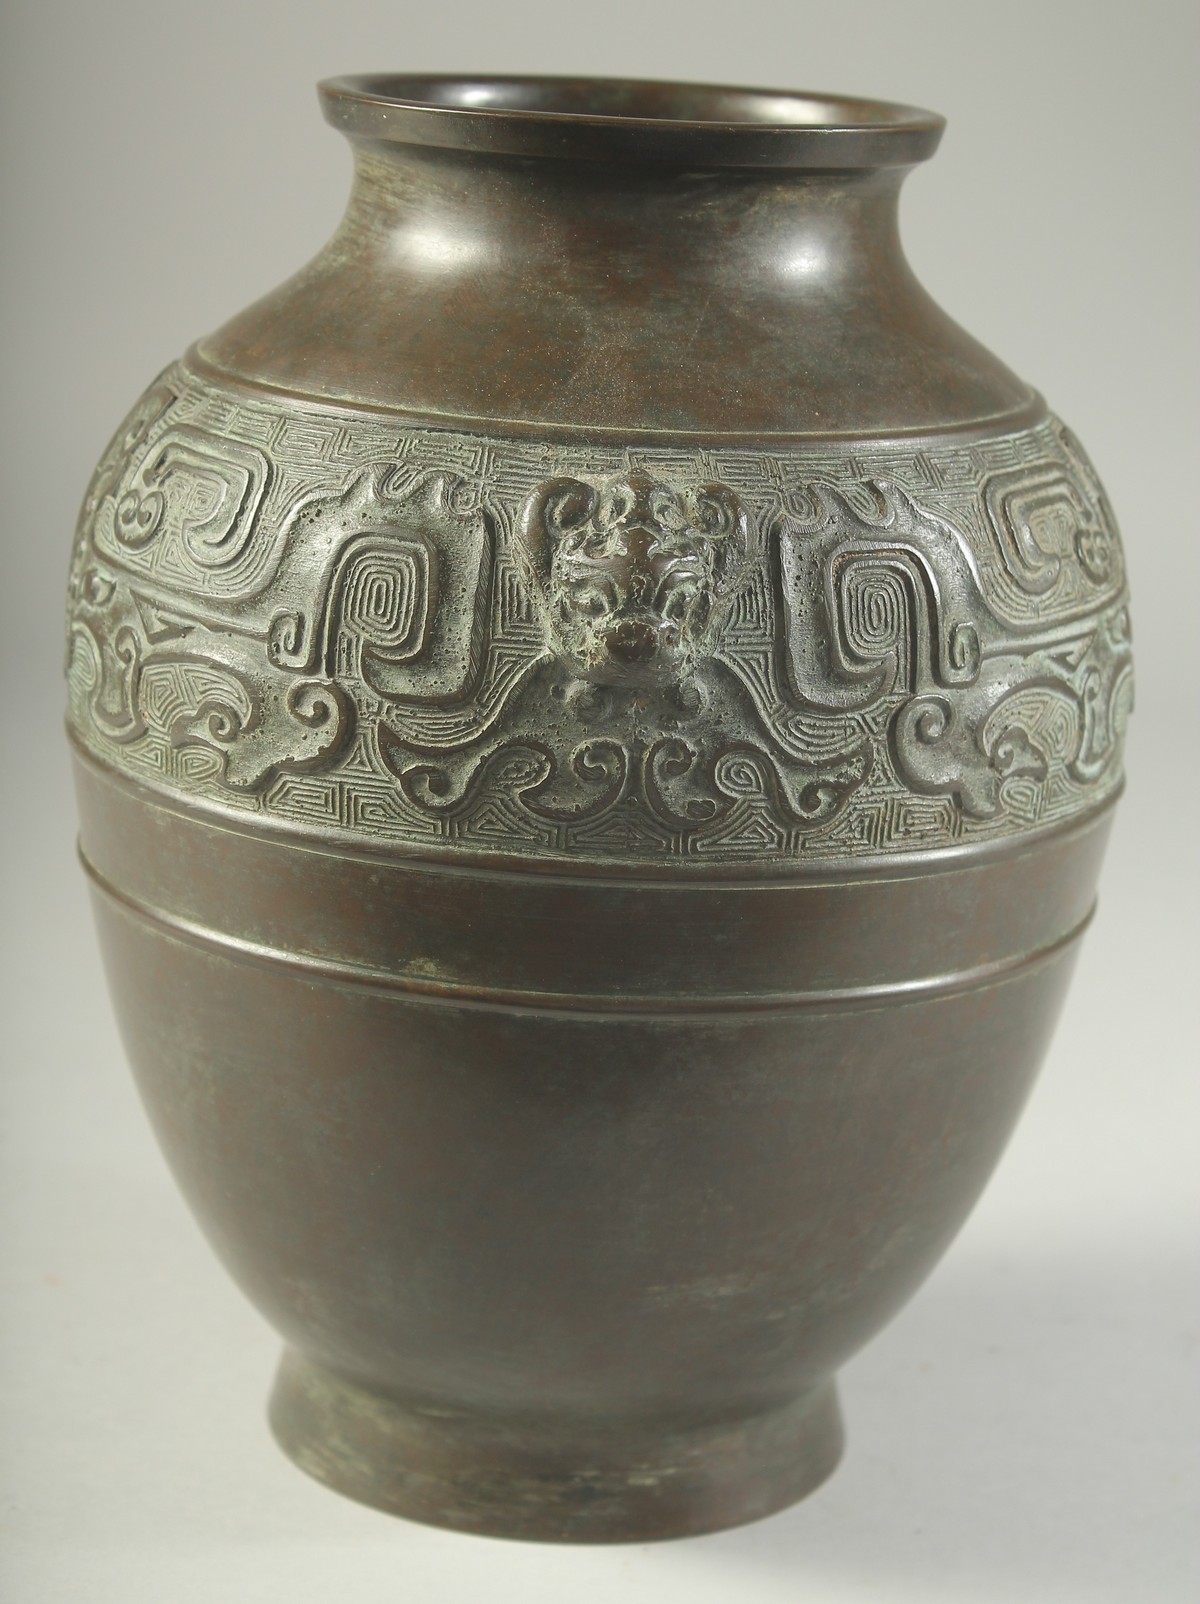 A CHINESE BRONZE VASE, with a band of archaic design and twin beast-head handles, 22cm high. - Image 2 of 6